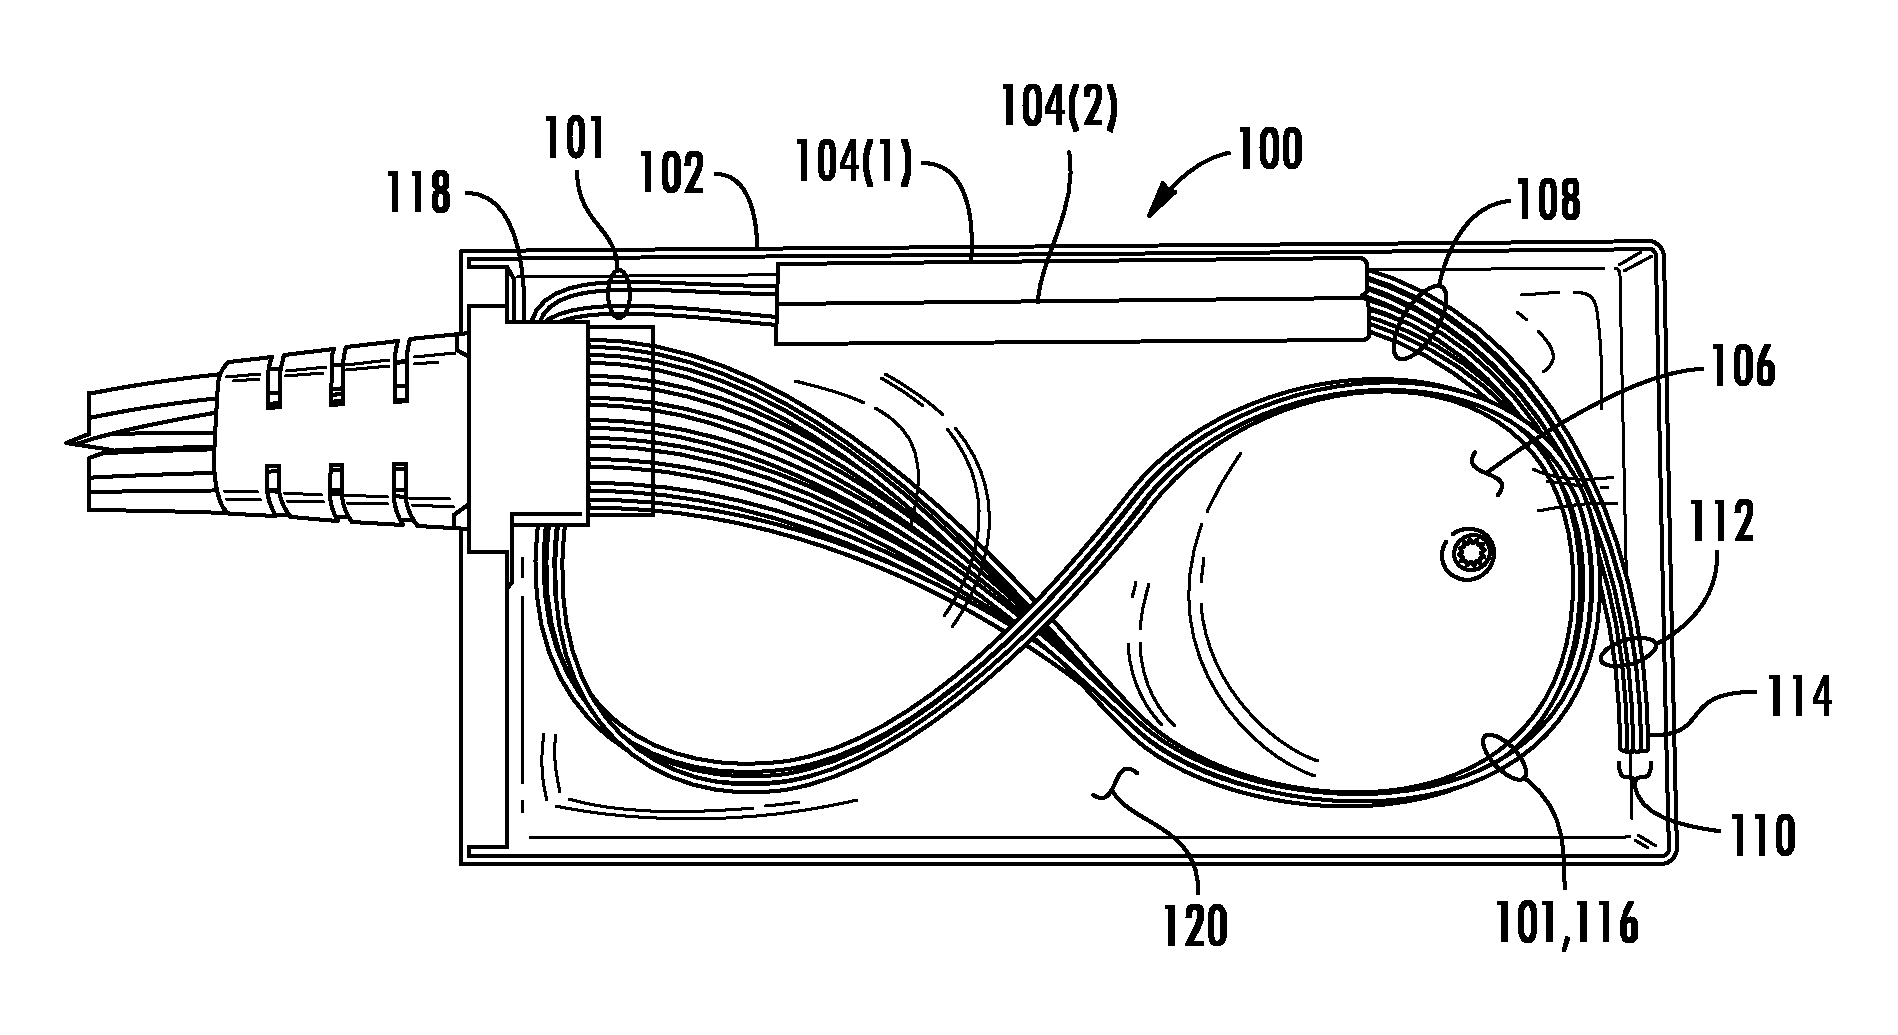 Attenuated splitter module for low count output channels and related assemblies and methods